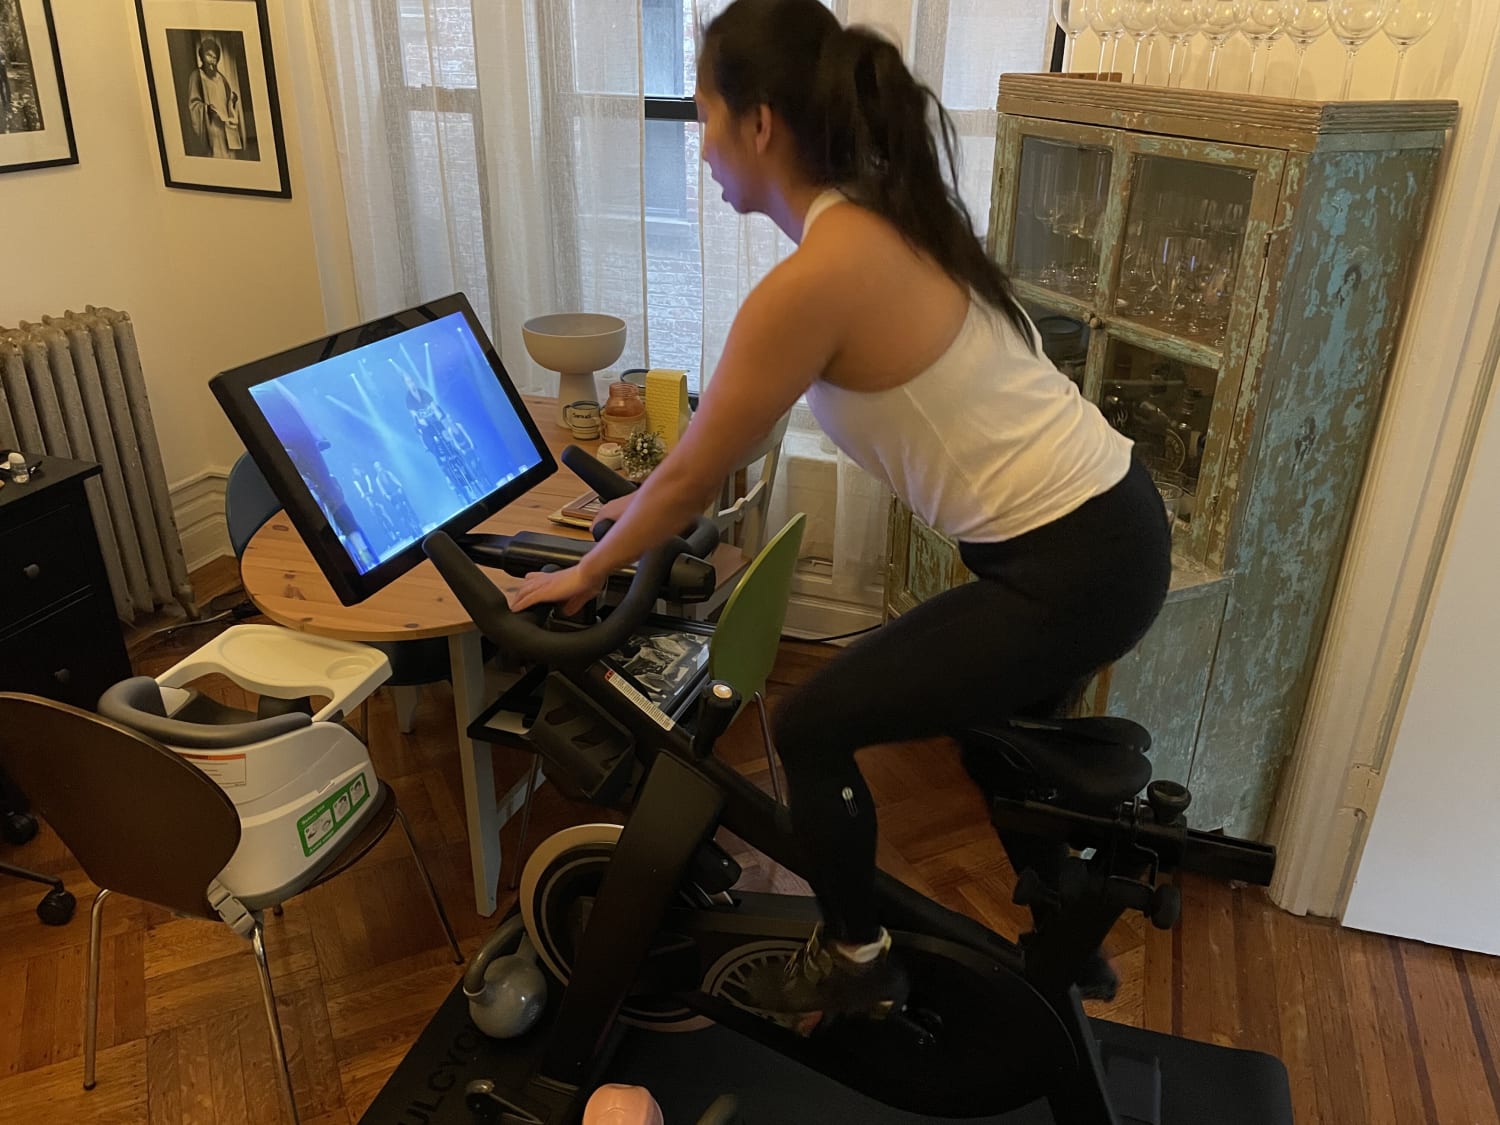 The SoulCycle at-home bike motivated me to workout again